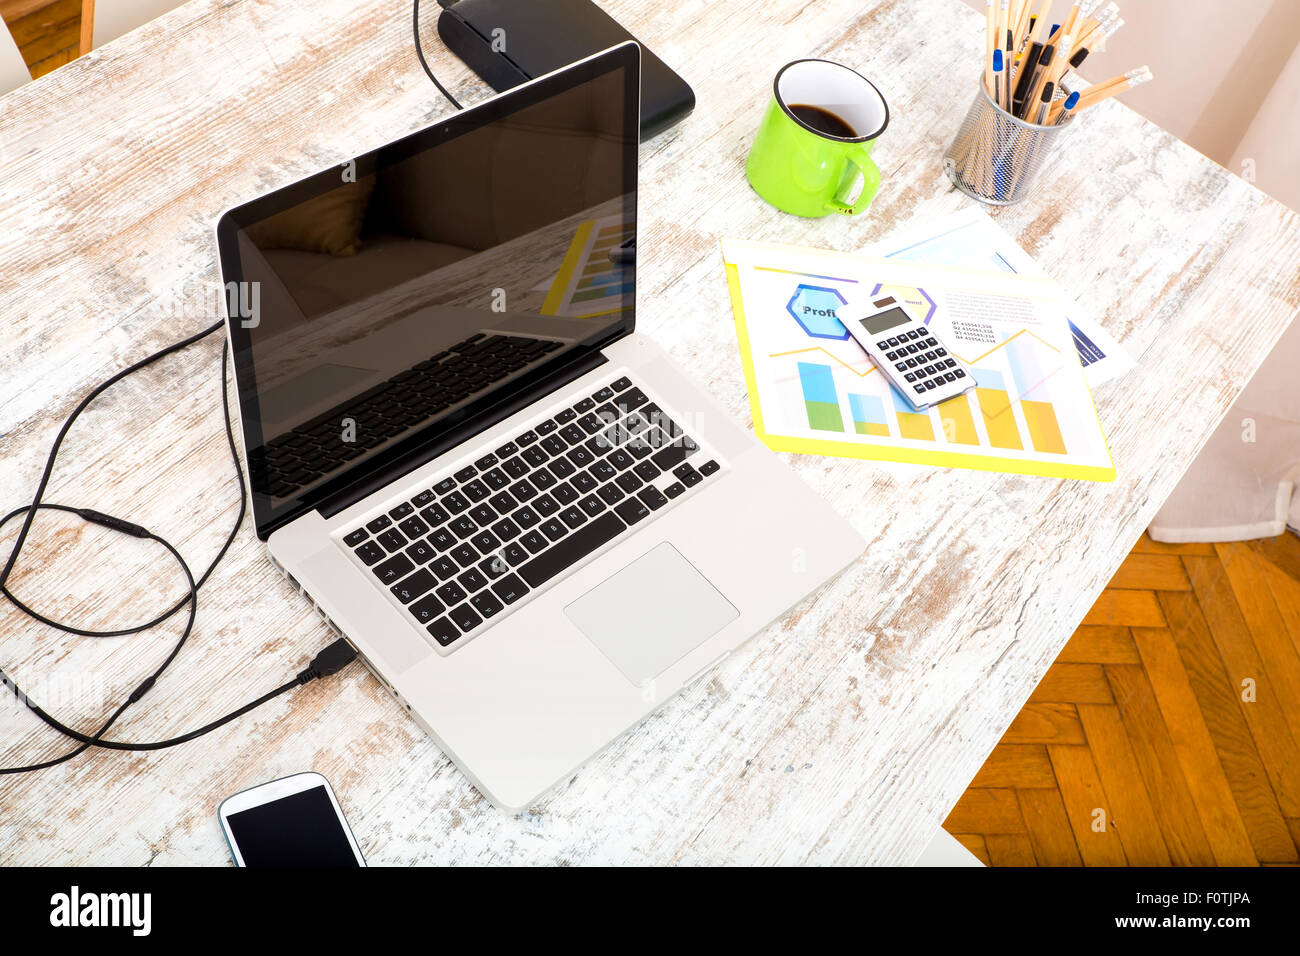 A modern home office setup on a wooden Table. Stock Photo